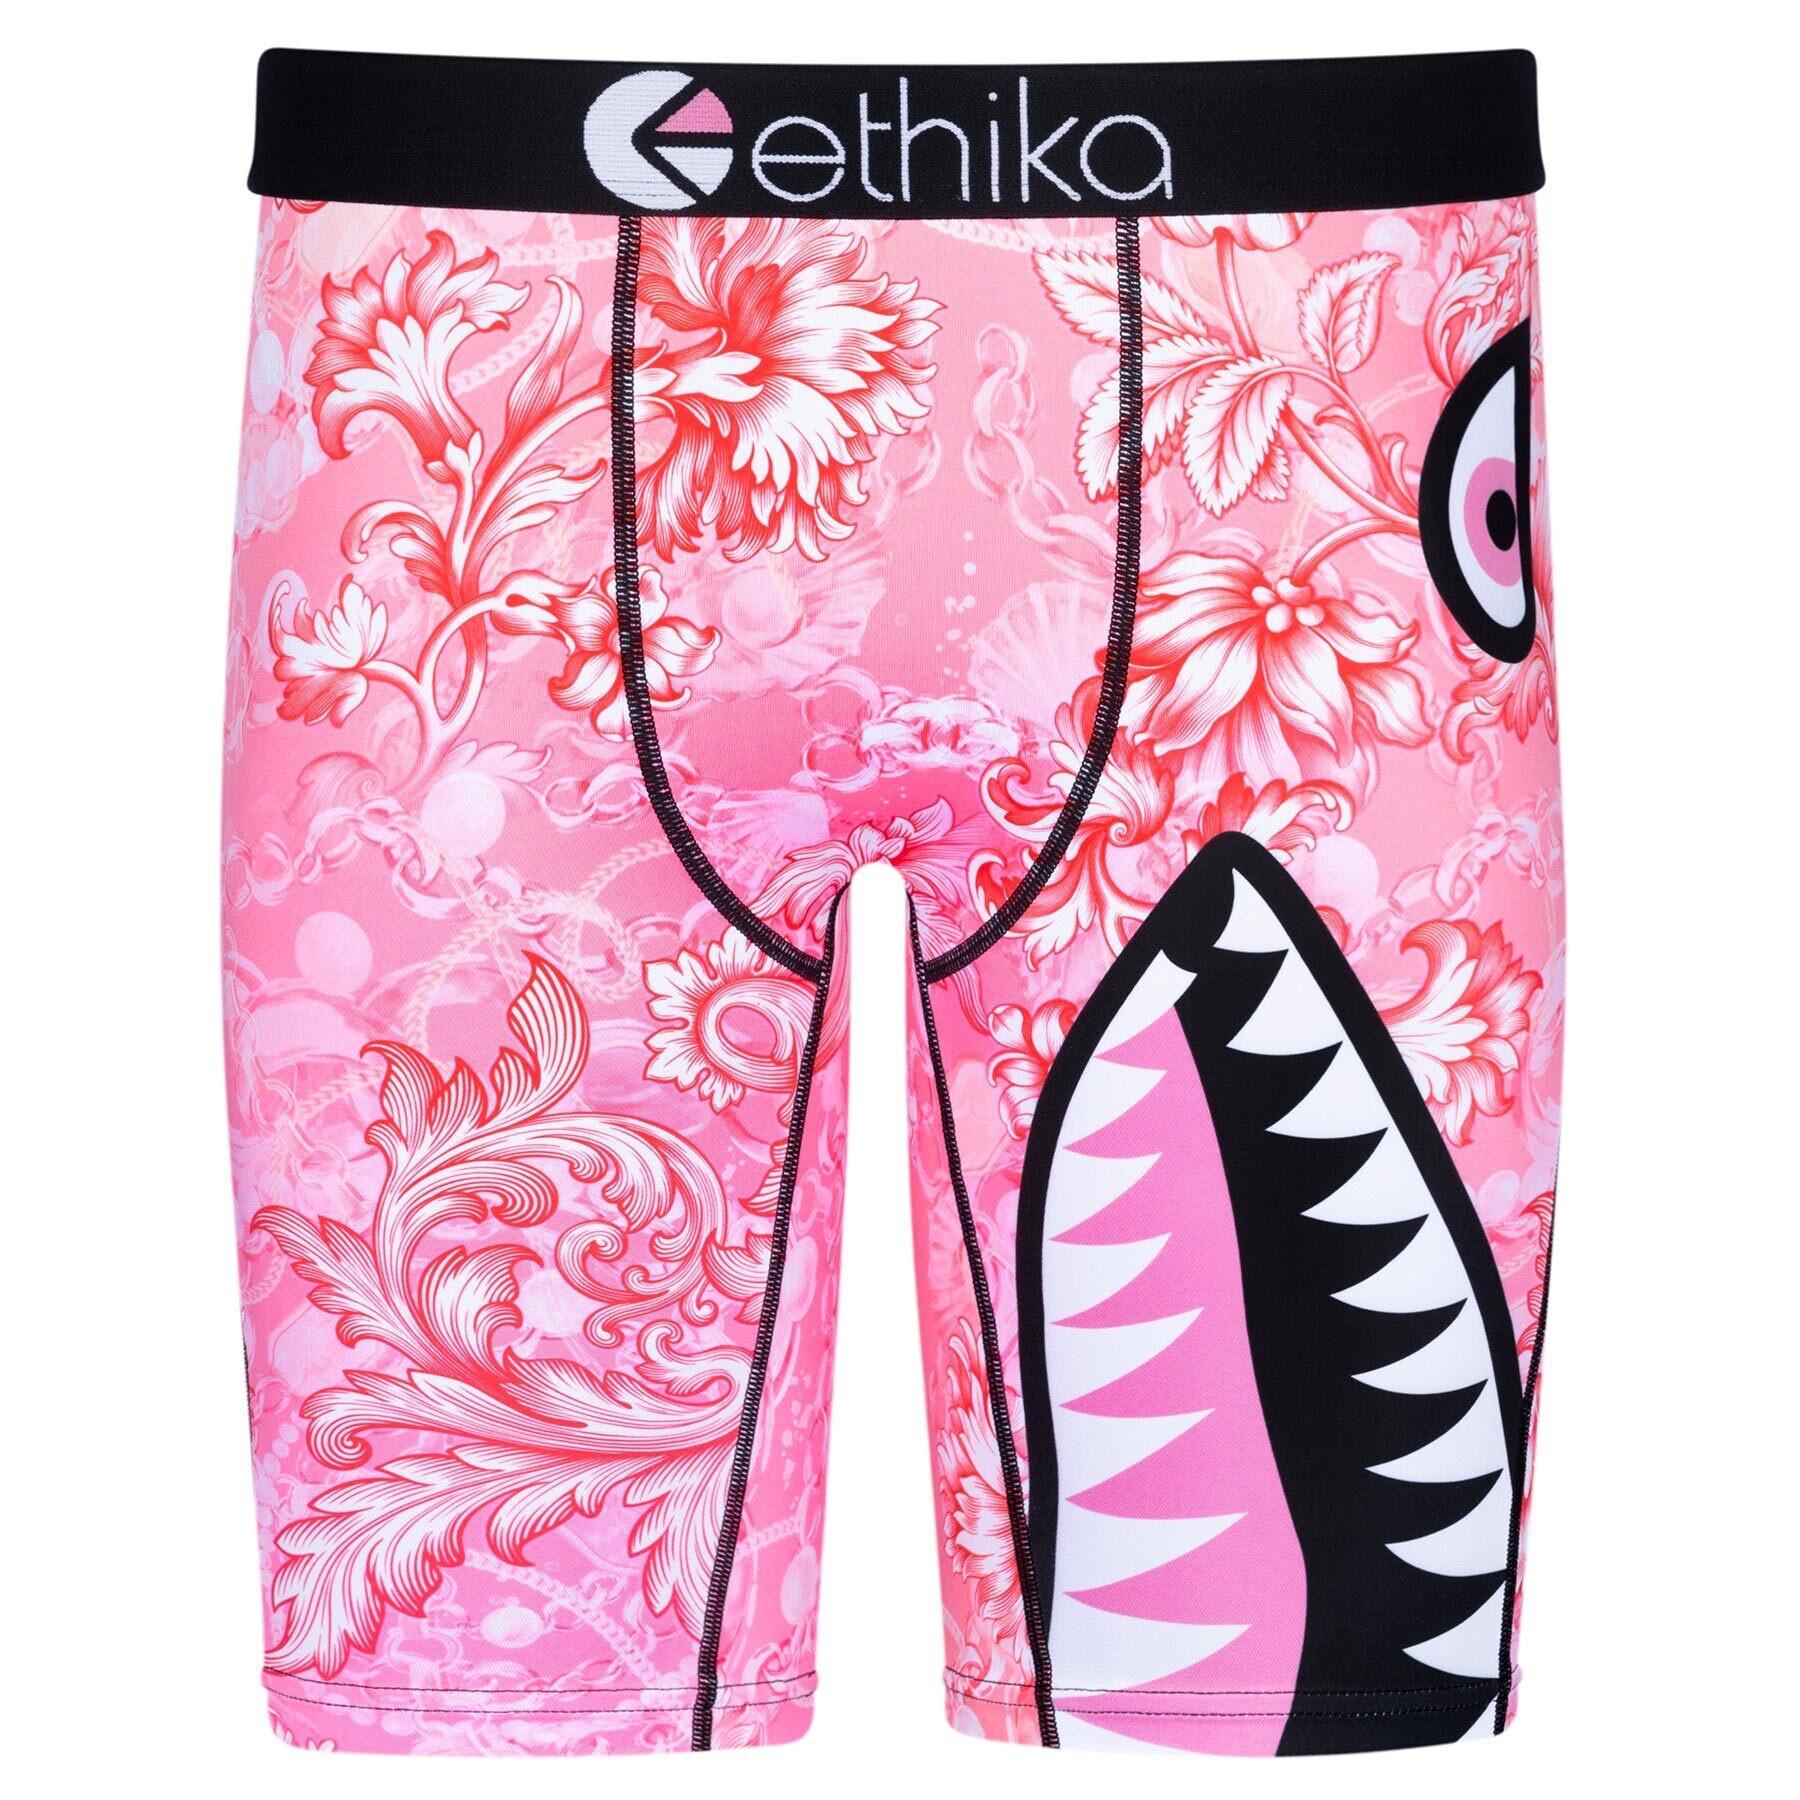 Ethika Breast Cancer Awareness Campaign